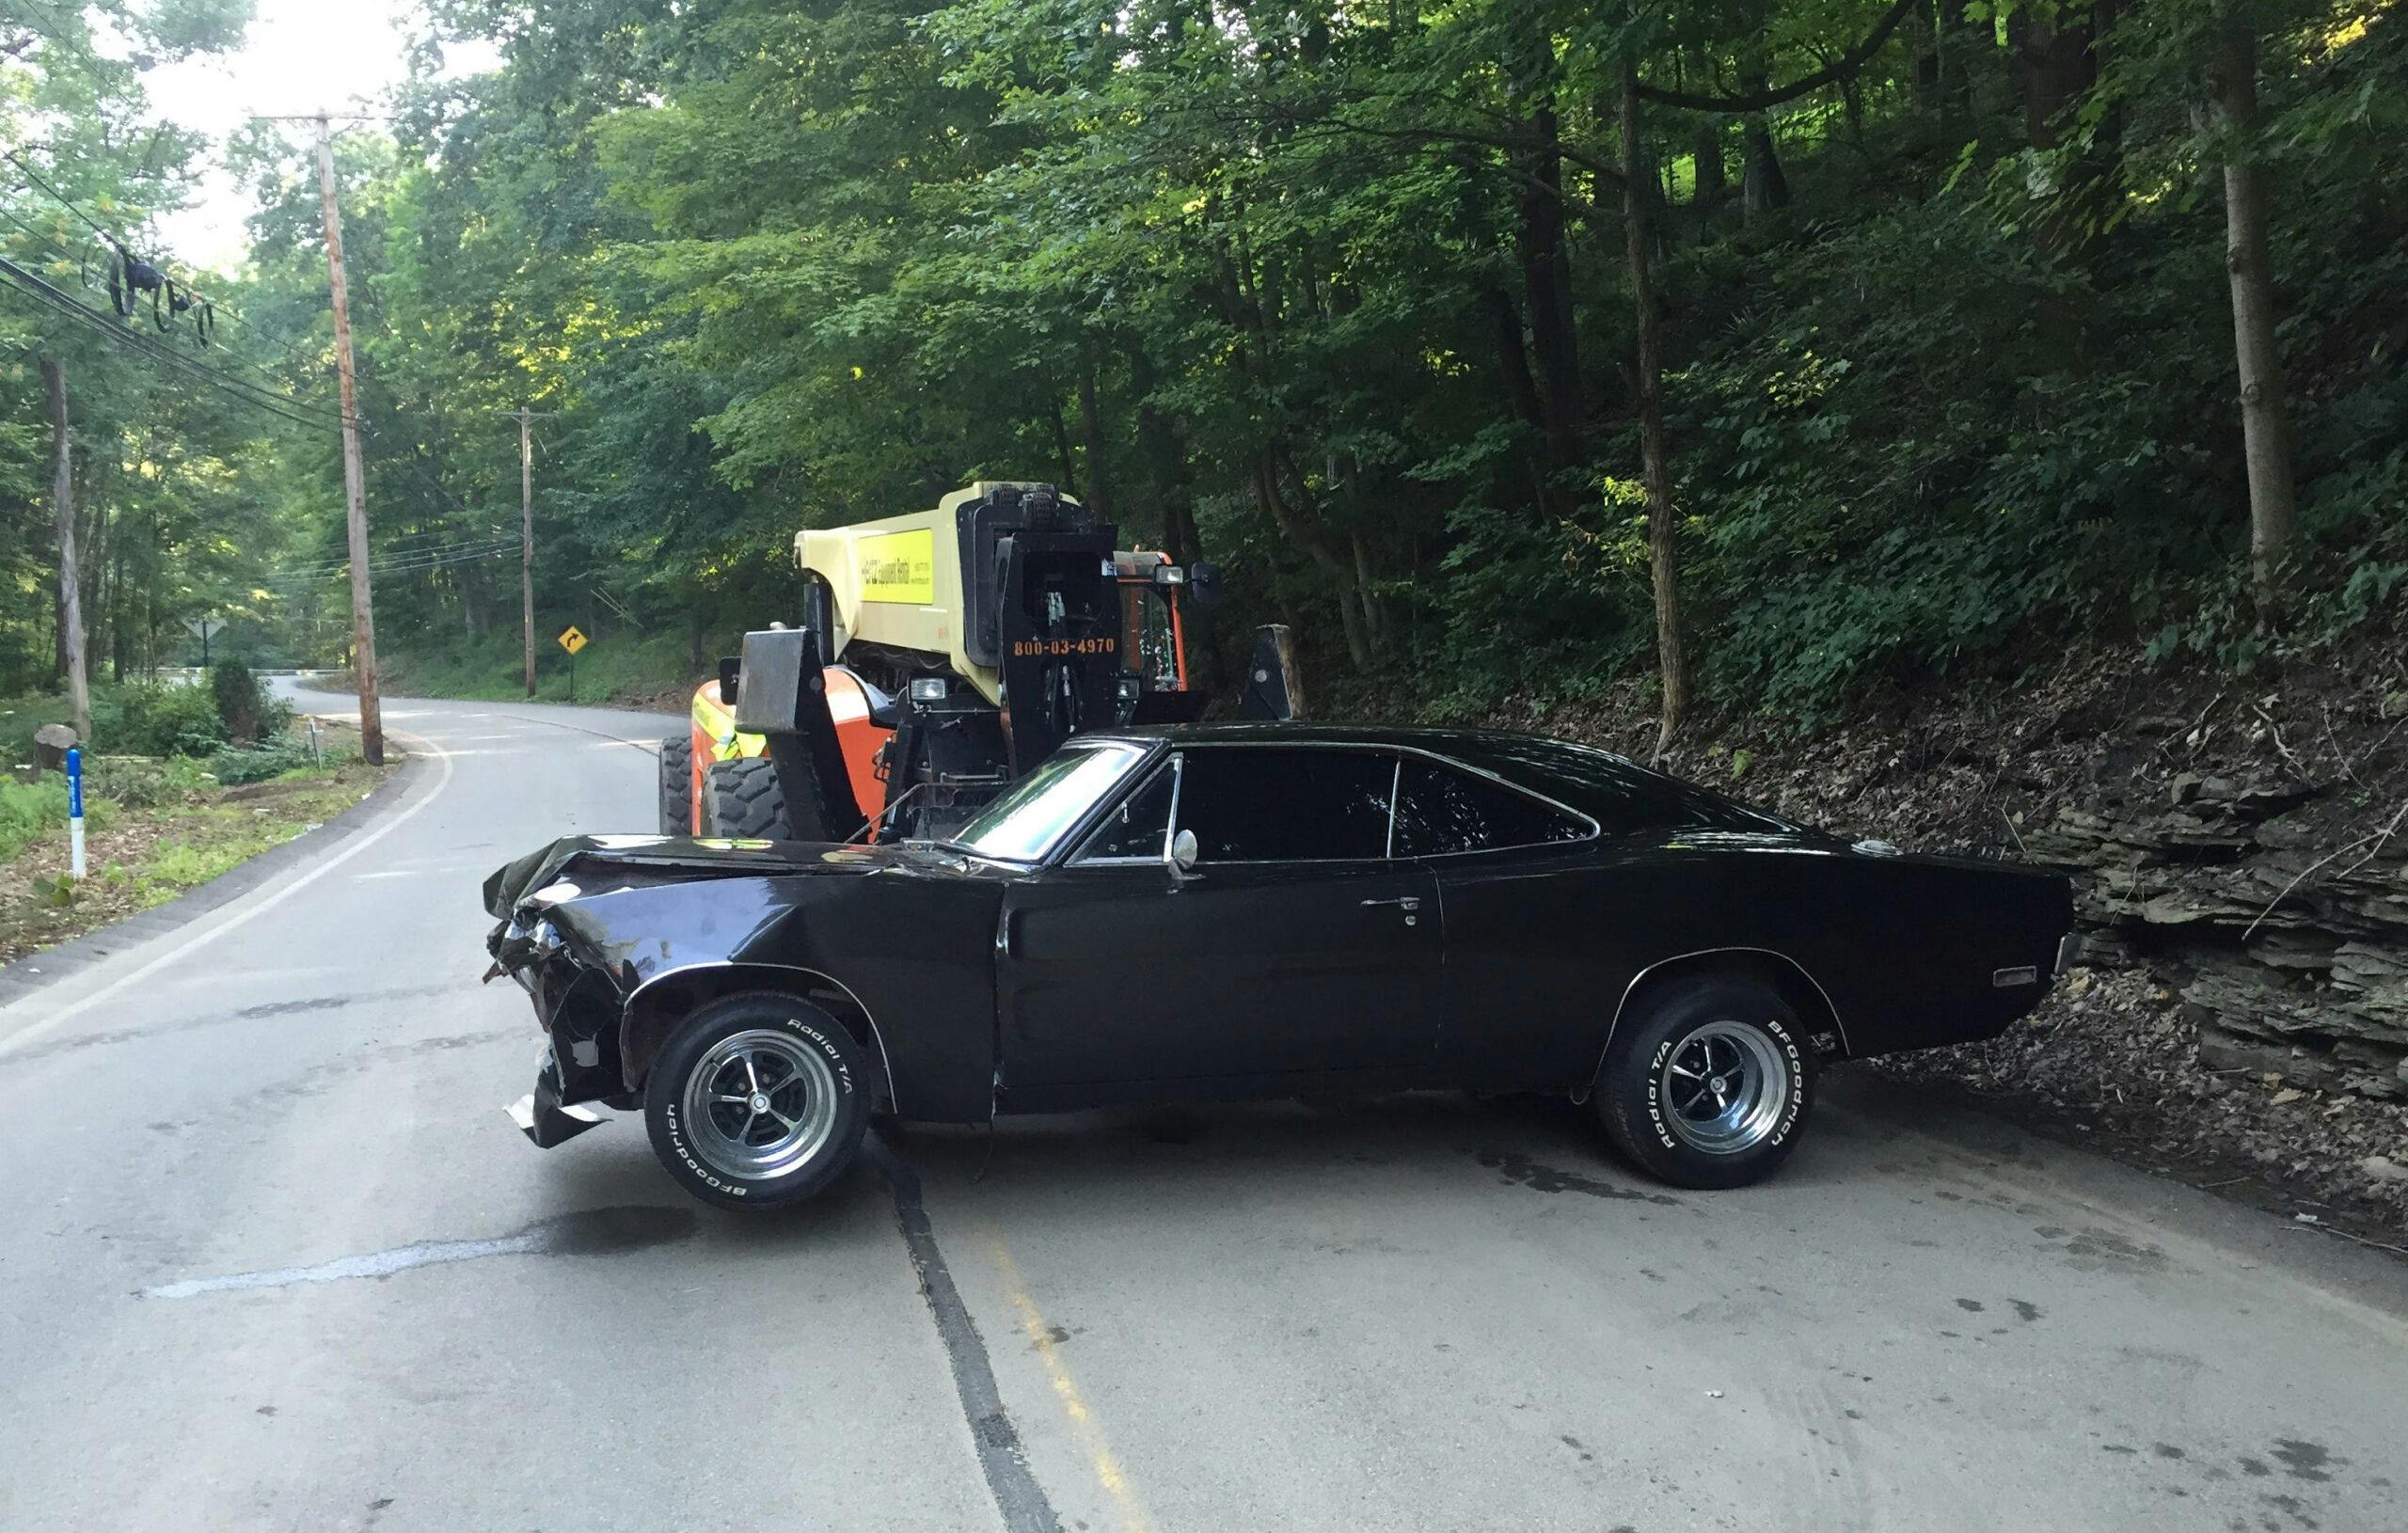 Crashed Charger muscle car move prop